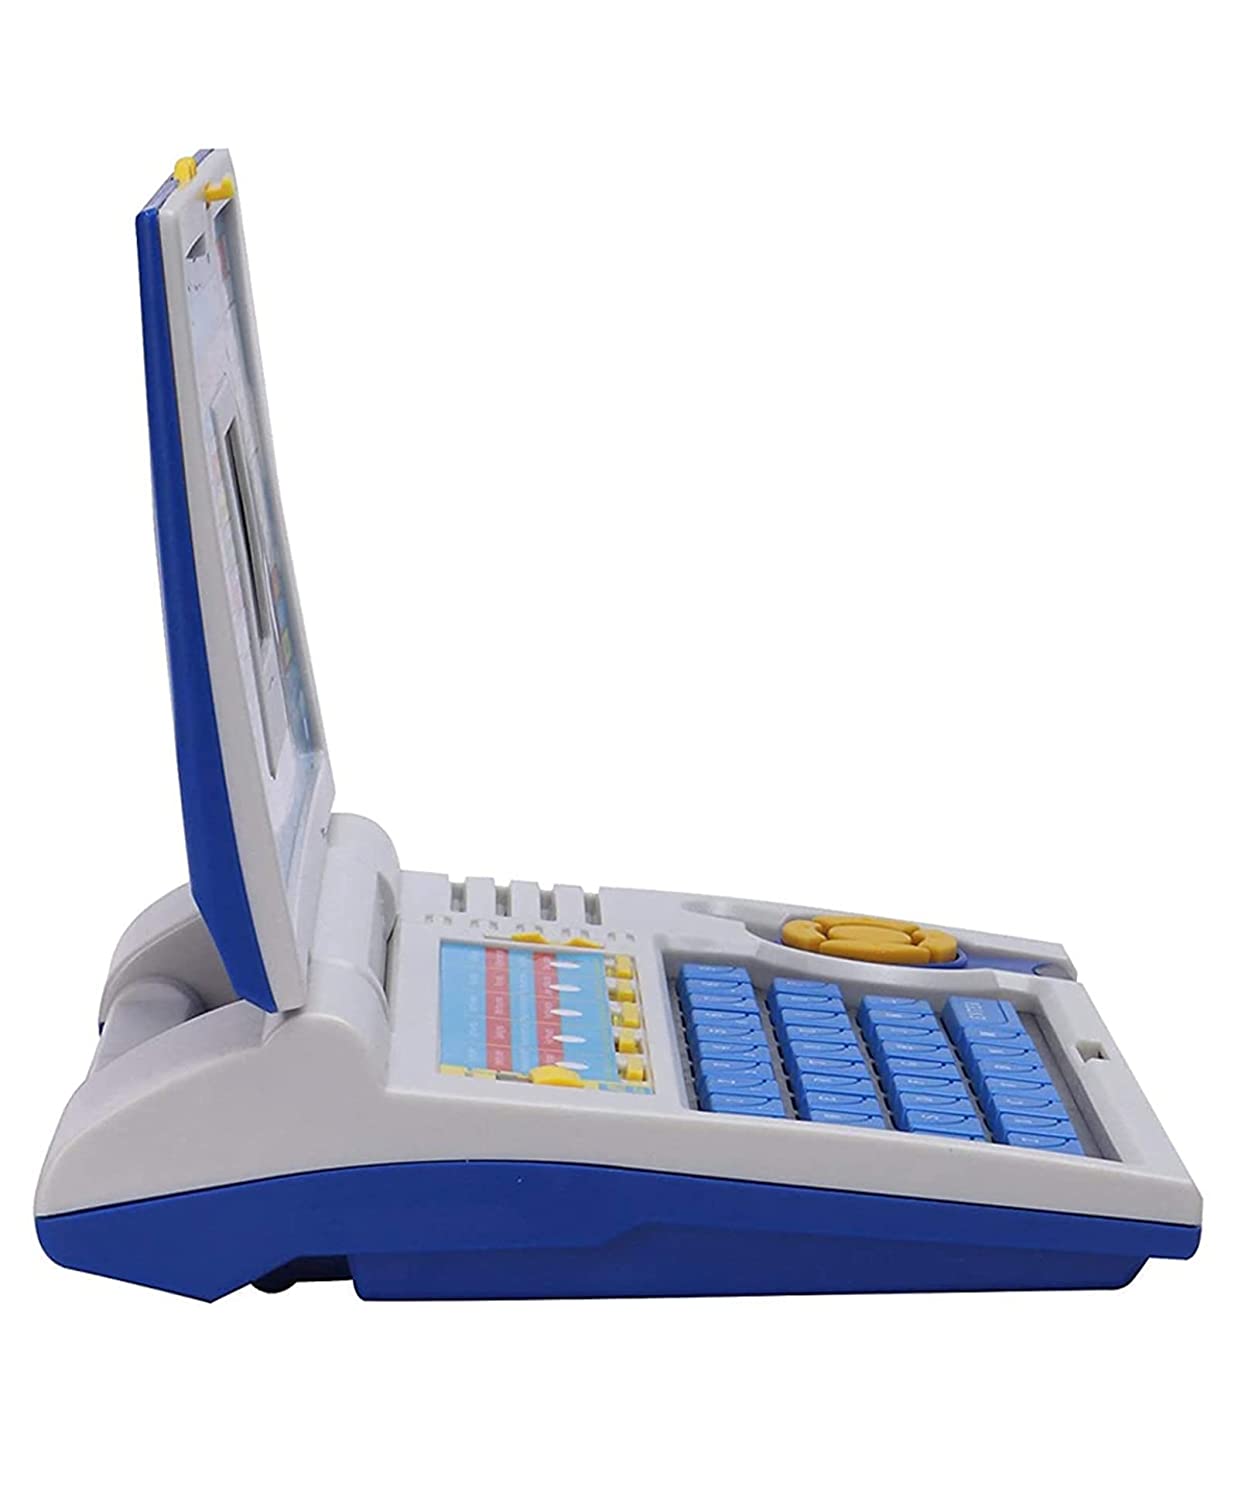 Educational-Laptop-Computer-Toy-with-Mouse-for-Kids-Above-3-Years-20-Fun-Activity-Learning-Machine-Now-Learn-Letter-Words-Games-Mathematics-Music-Logic-Memory-Tool